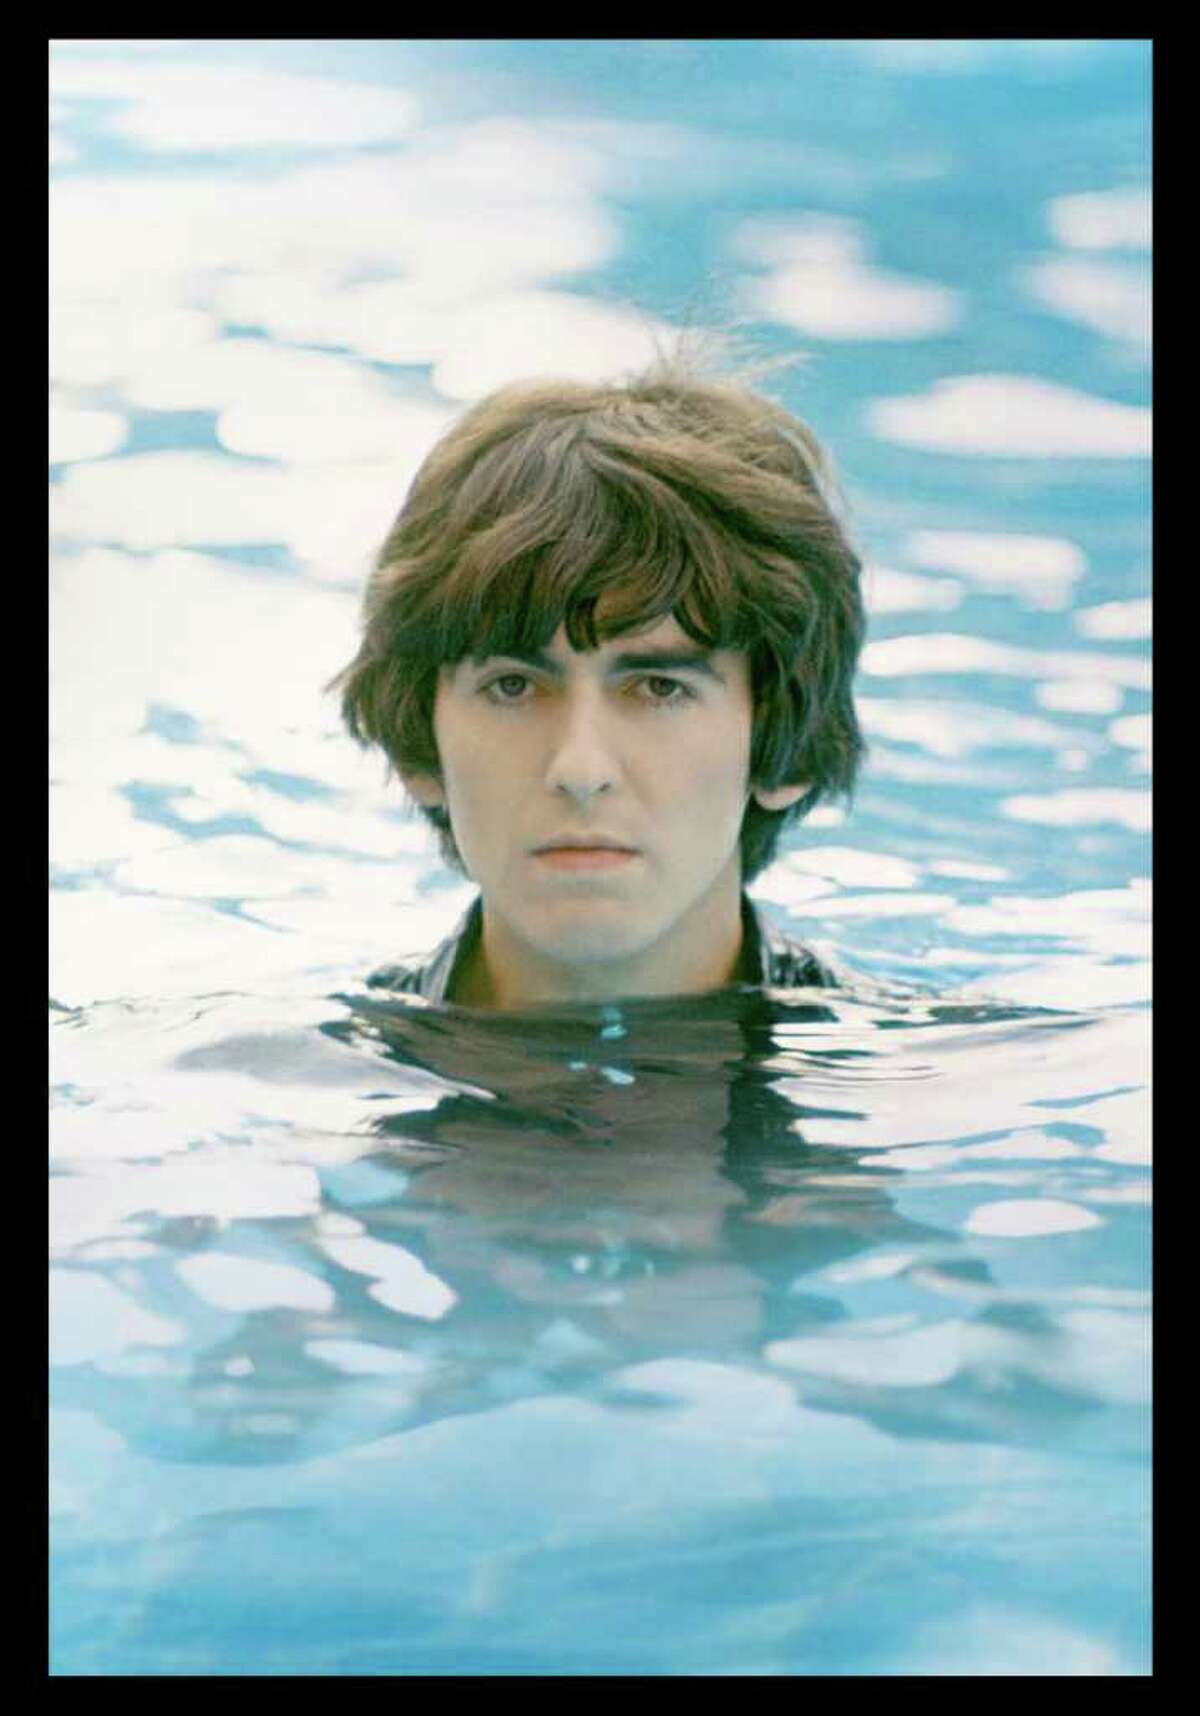 image of George Harrison from the Martin Scorsese documentary George Harrison: Living in the Material World GEORGE HARRISON: LIVING IN THE MATERIAL WORLD. photo: Apple Corps Limited/ courtesy of HBO